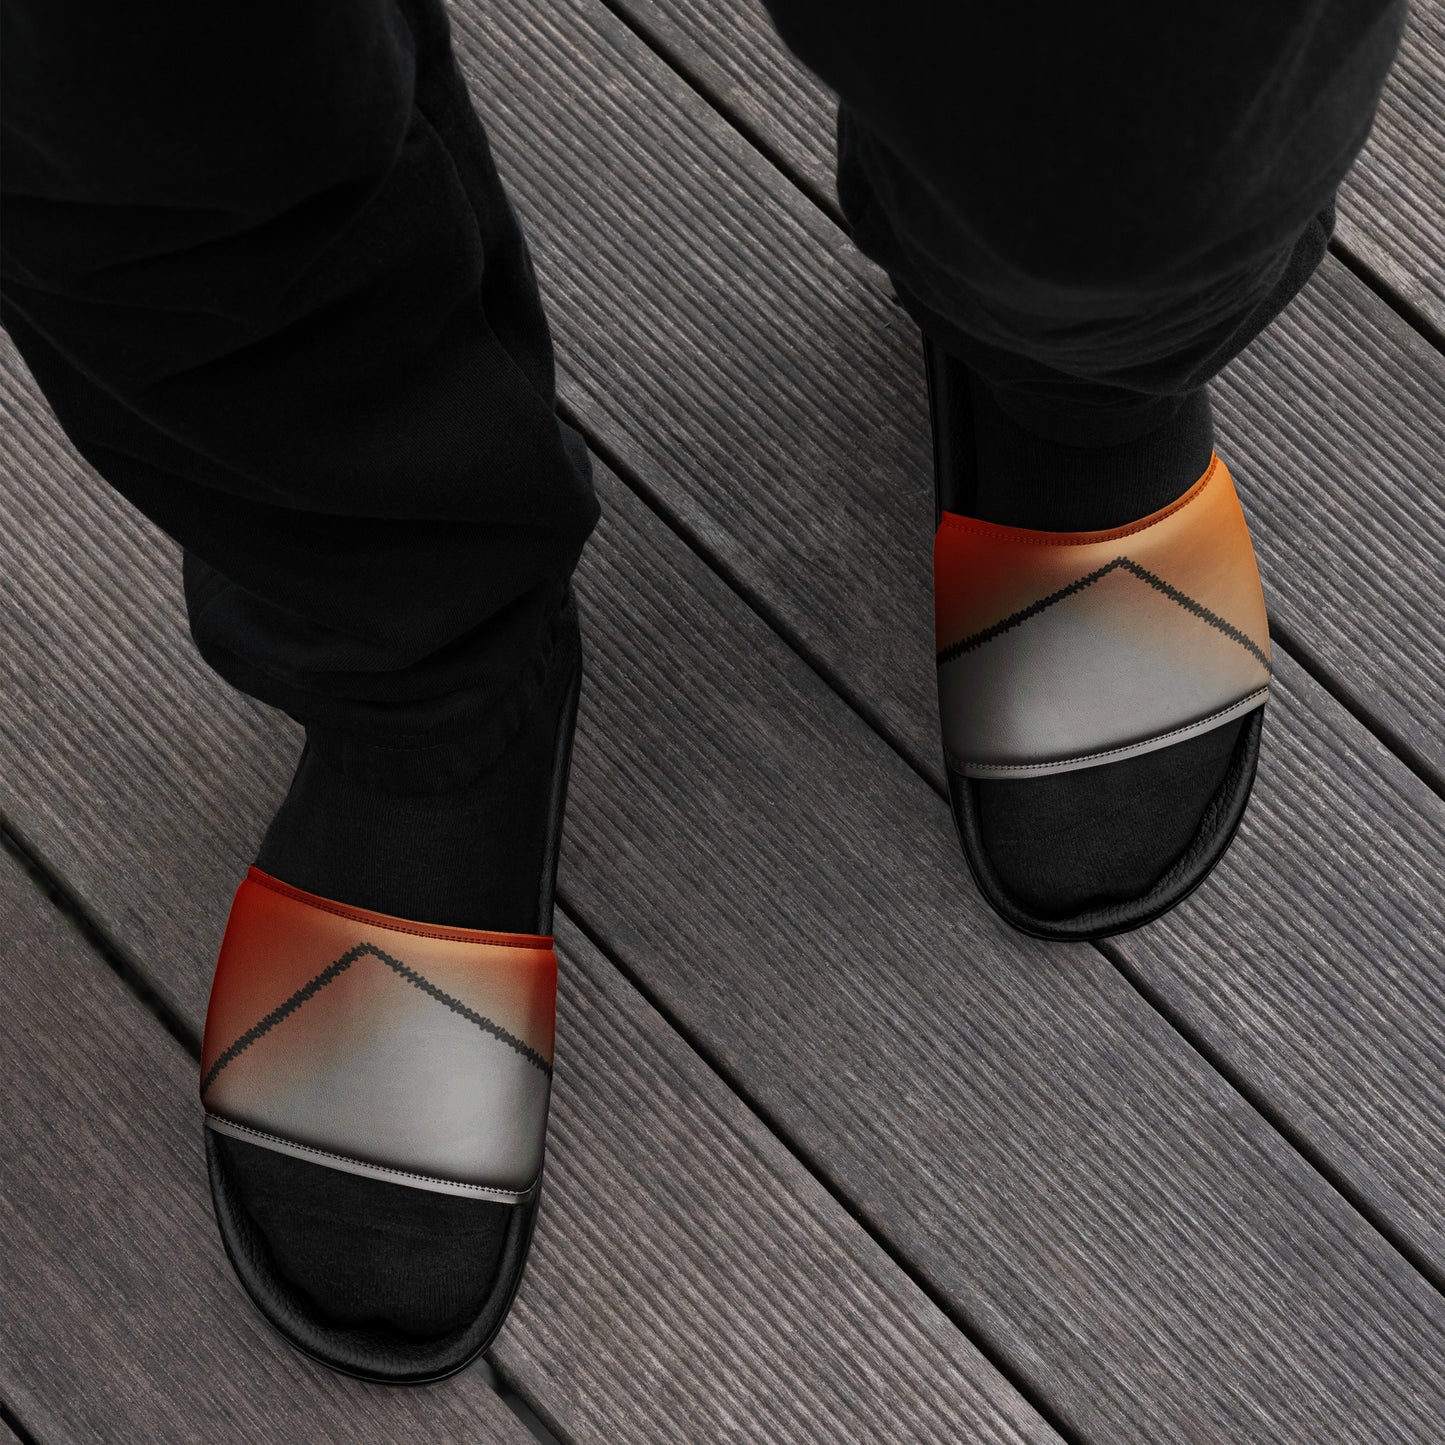 Abstract Men’s slides - O By Onica Online Store